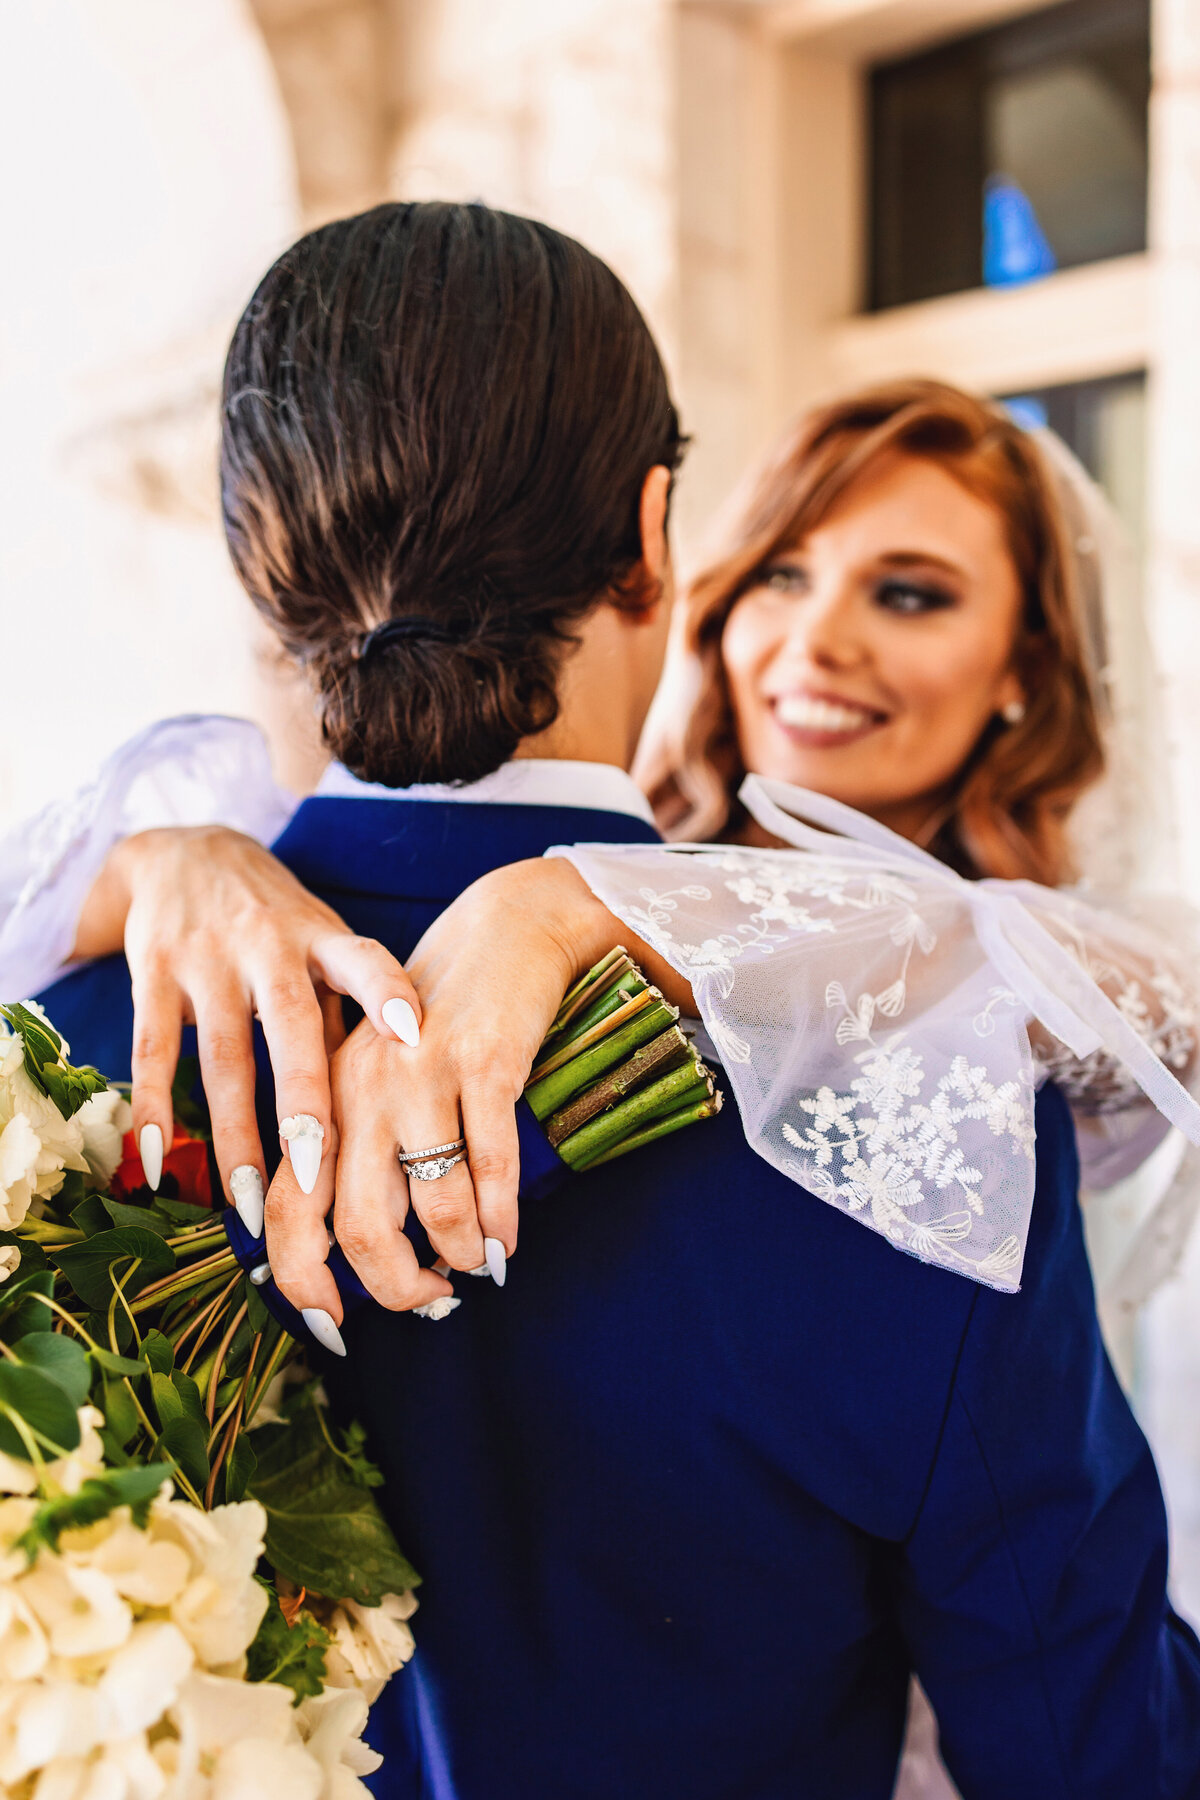 Find bliss in the heart of New Braunfels with an urban courthouse elopement. Love in full color, an intimate escape, and the beginning of your unique adventure.